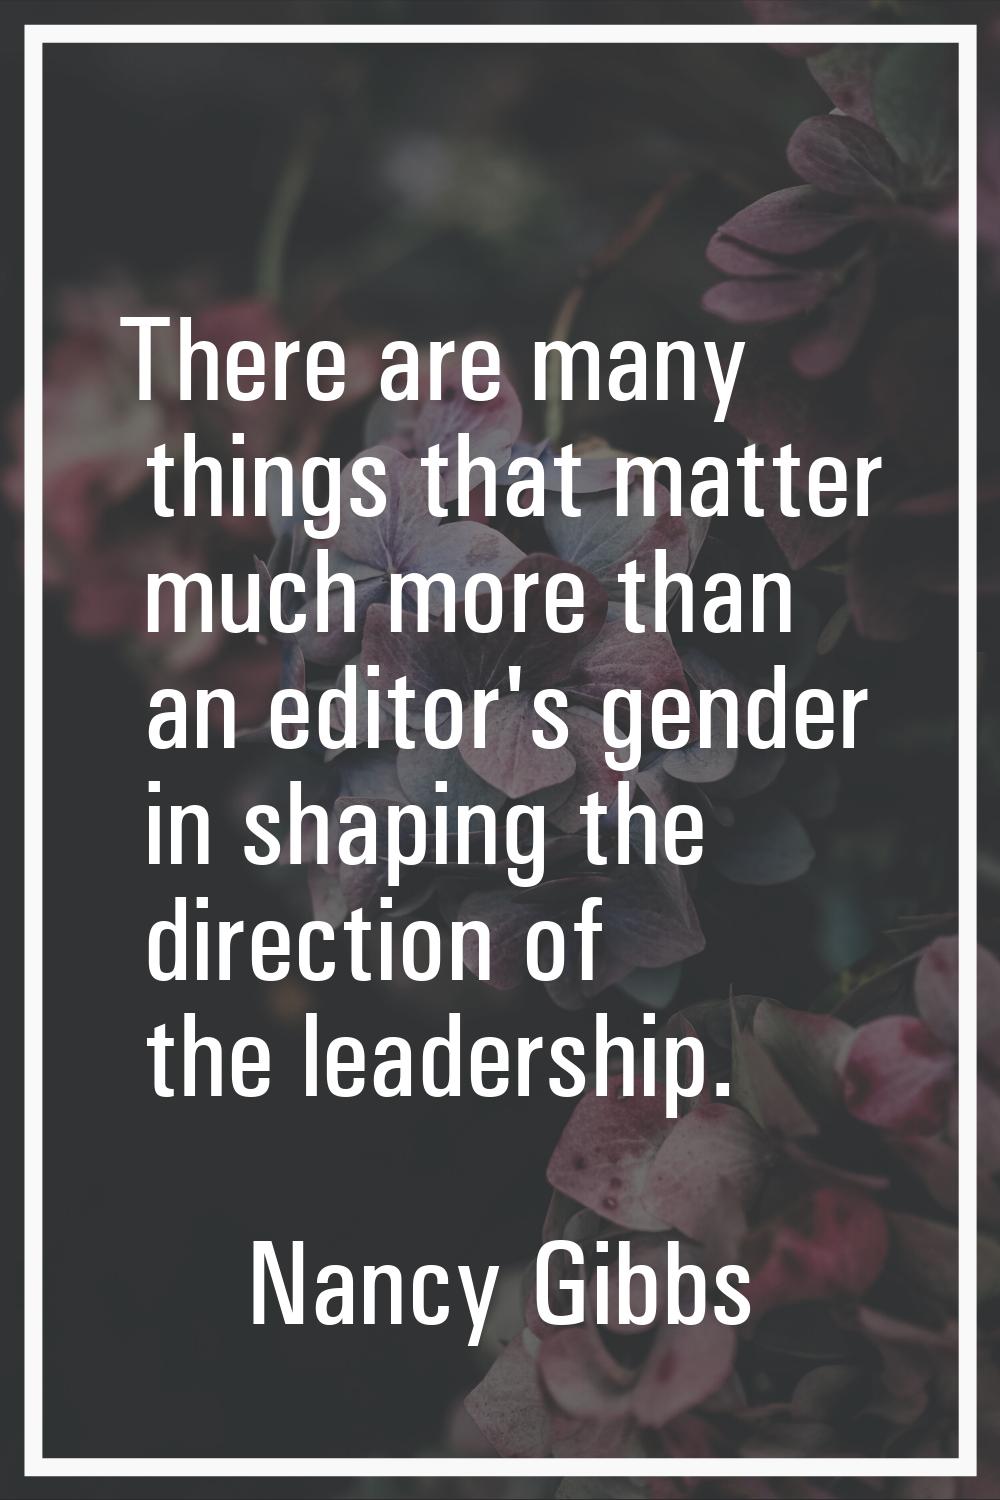 There are many things that matter much more than an editor's gender in shaping the direction of the